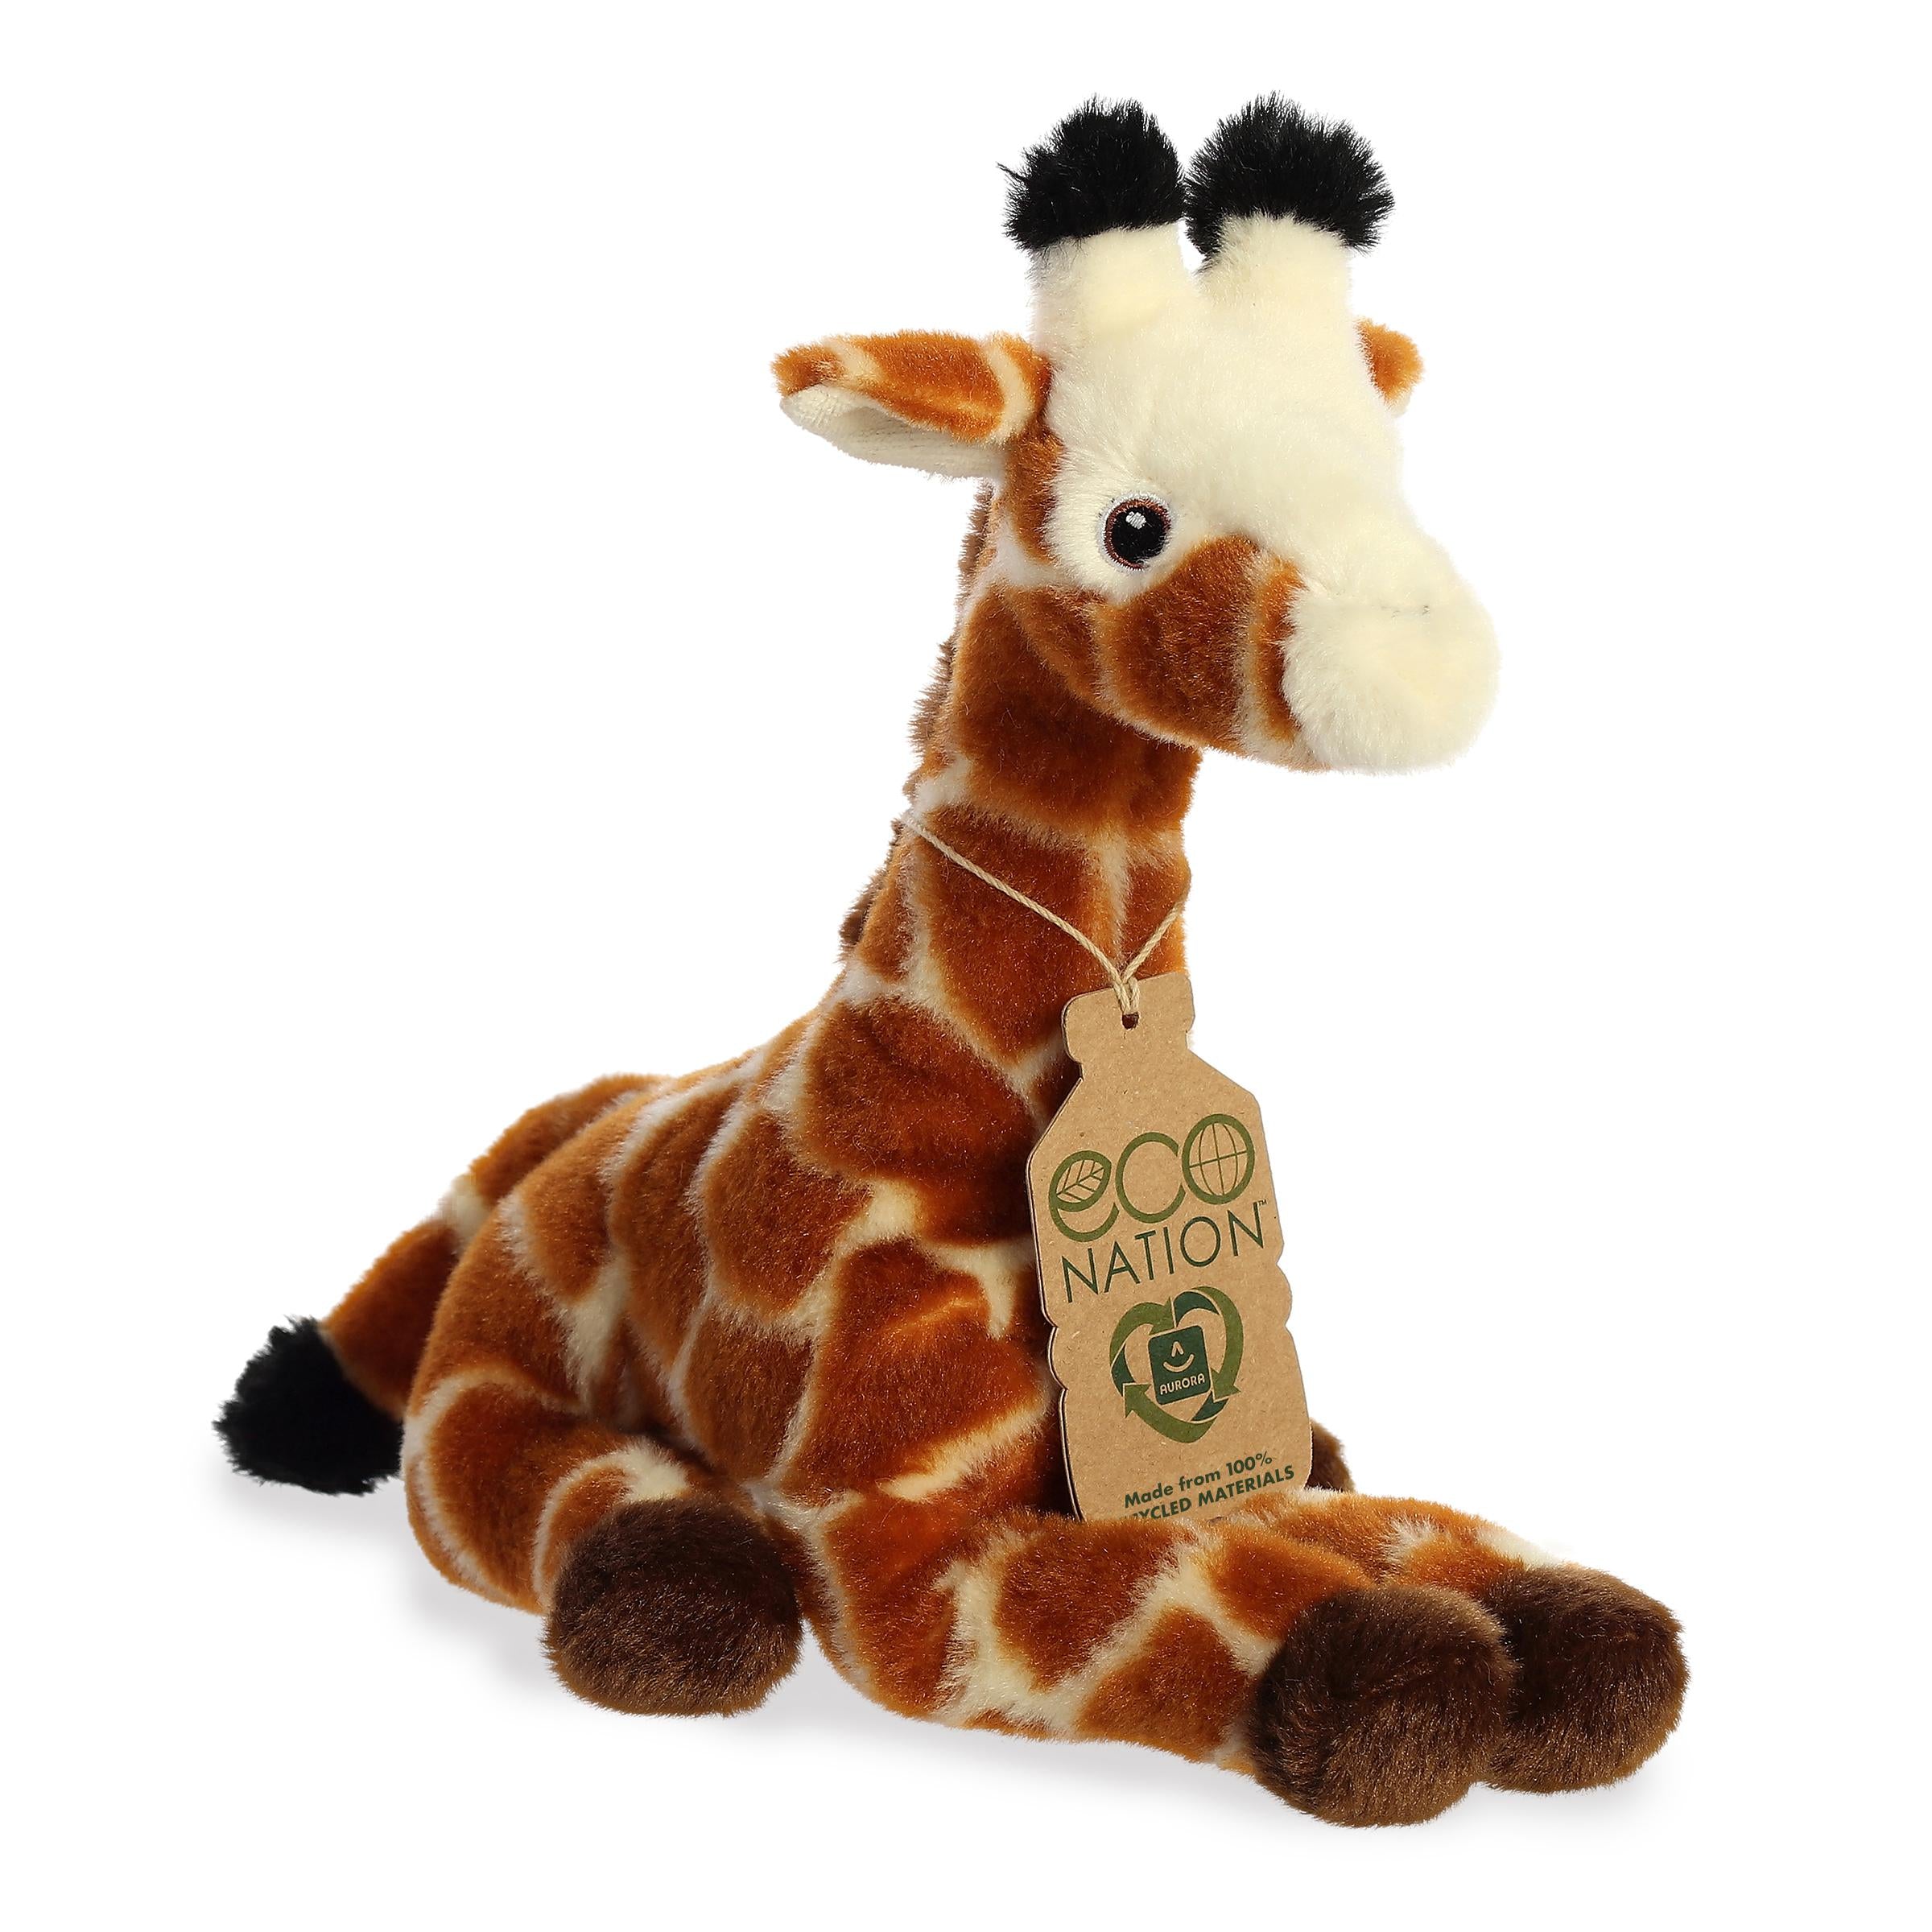 A giraffe plush resembling the real animal with orange and yellow colors throughout, embroidered eyes, and an eco-nation tag